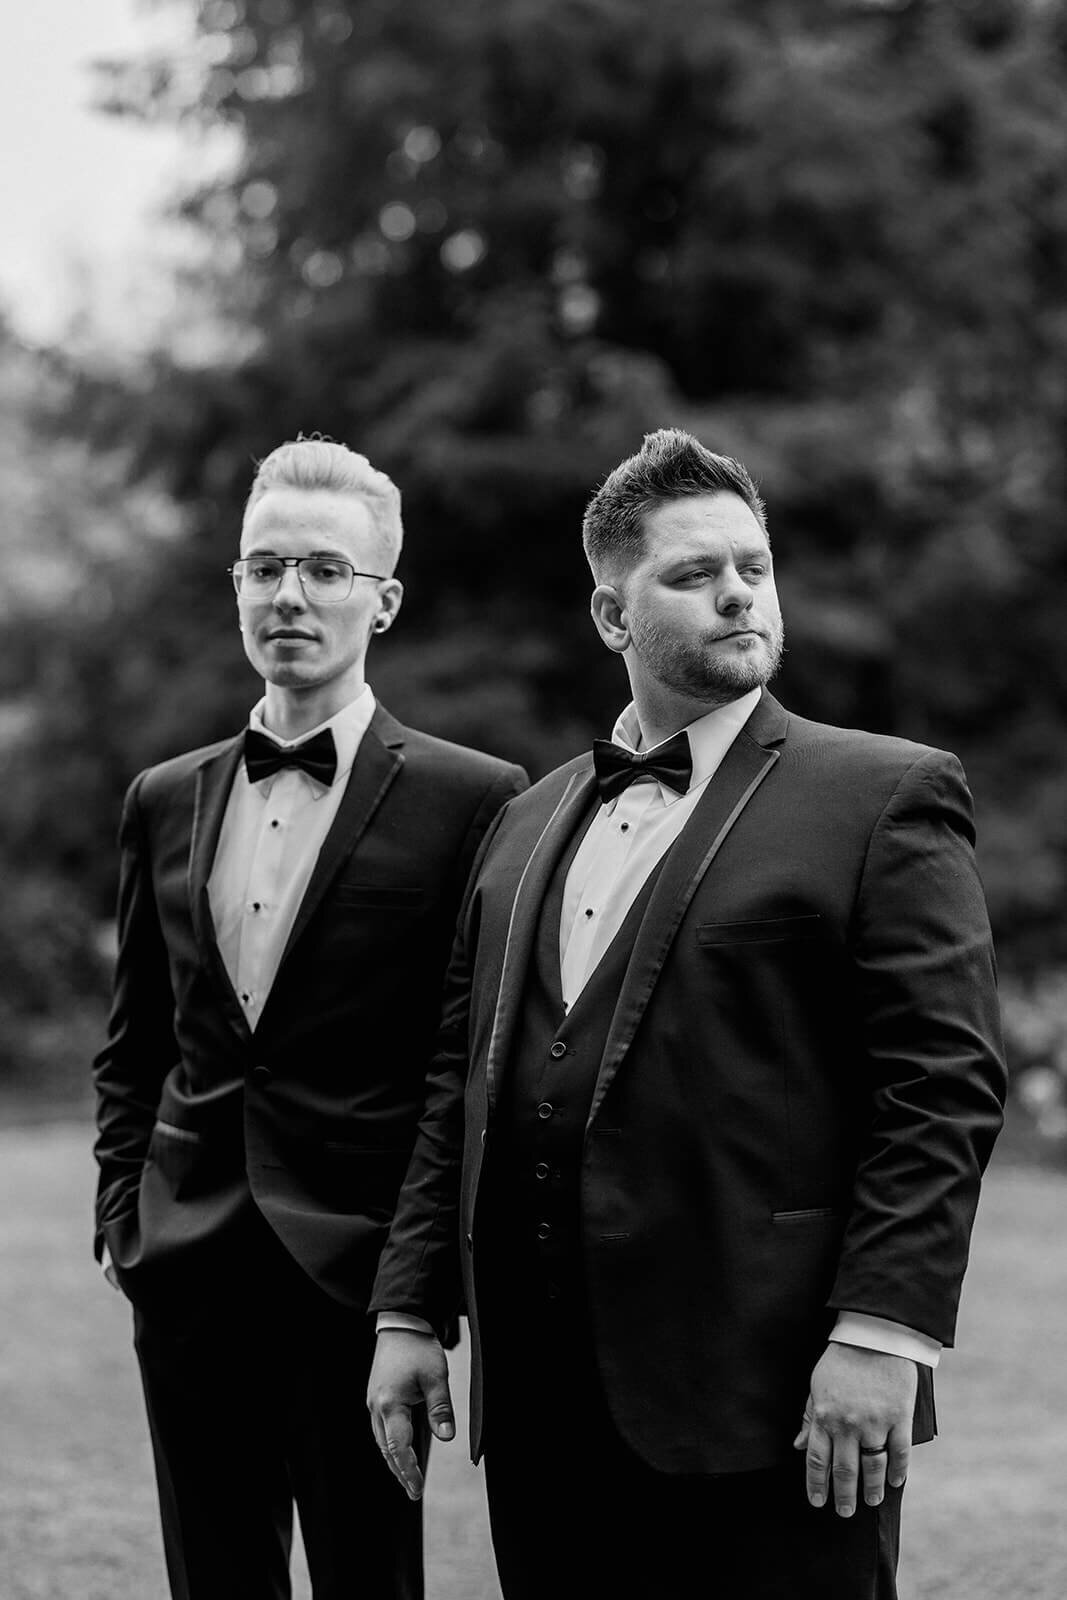 classic black and white two grooms wedding portrait